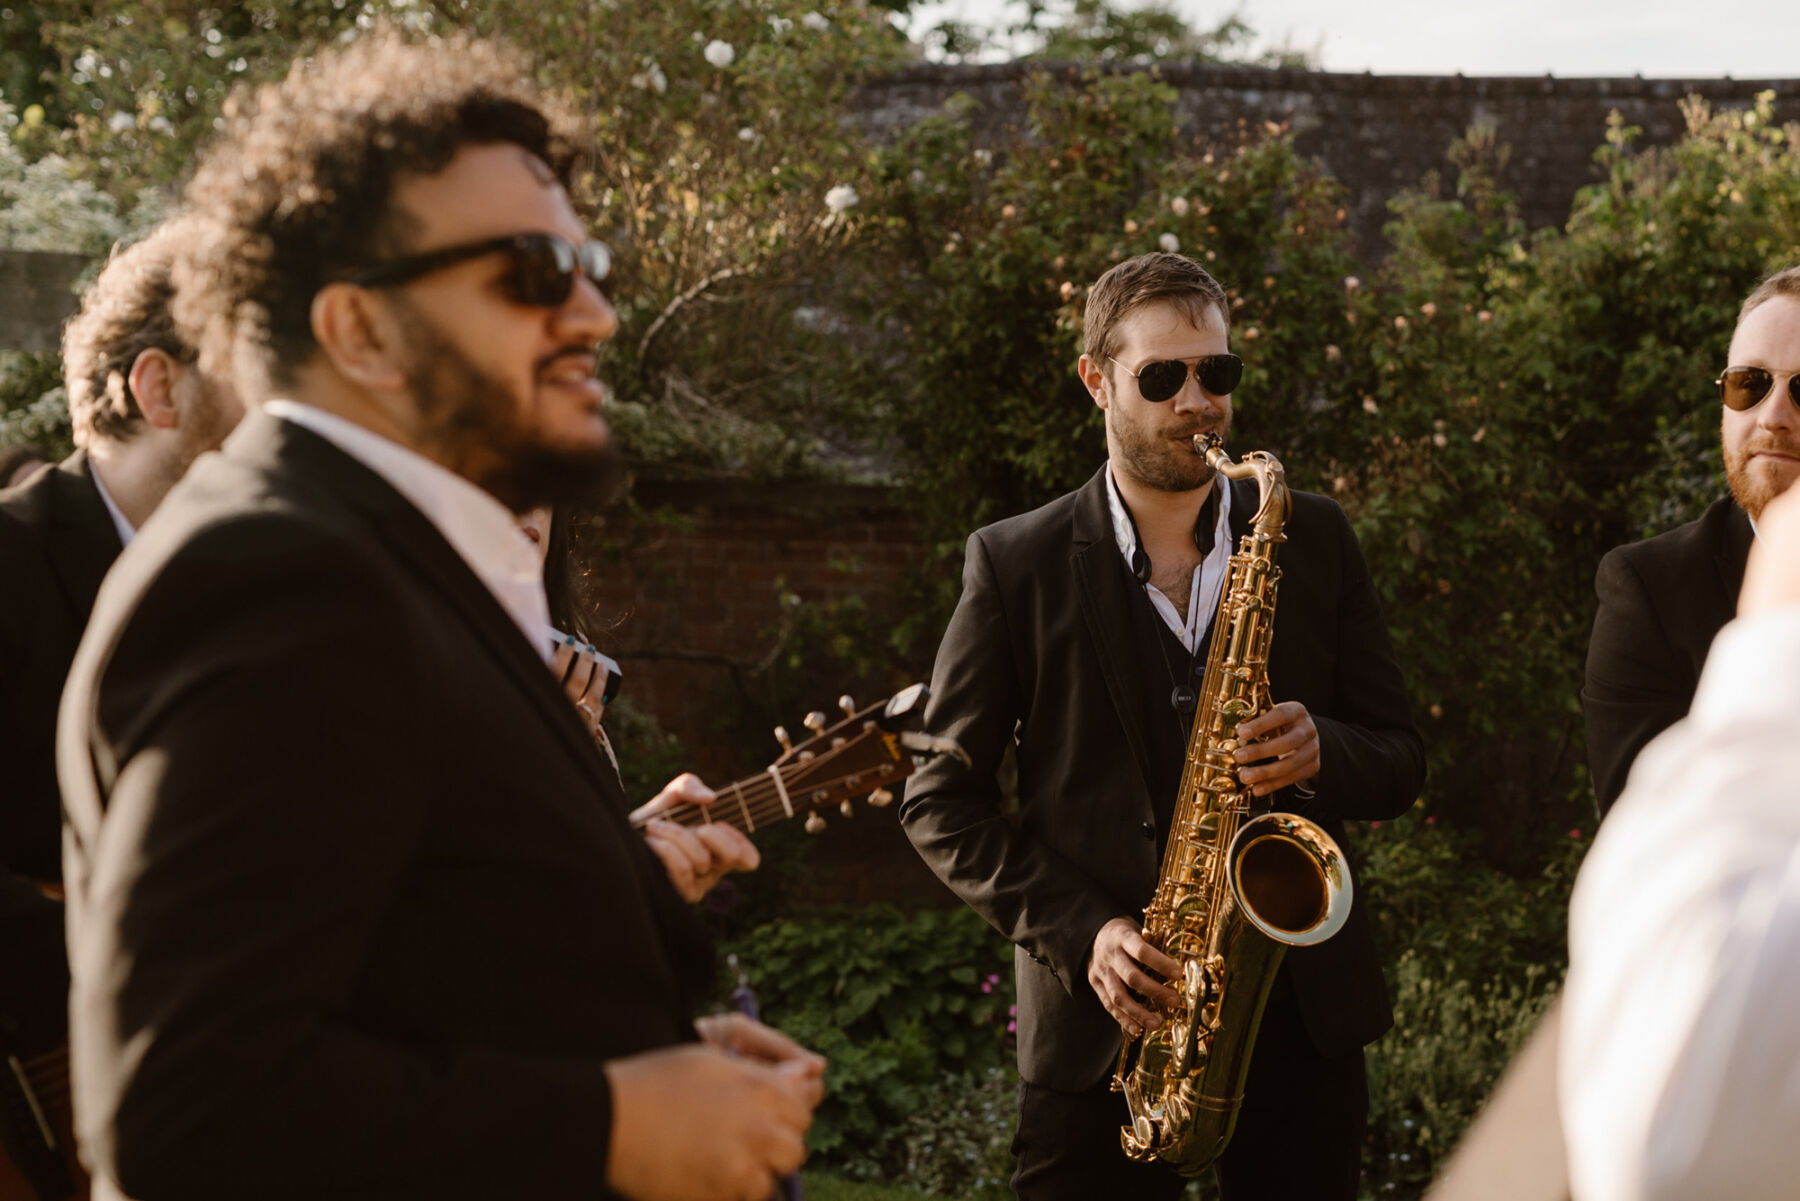 Live 4 piece jazz band performing to wedding guests at Dewsall Court. Agnes Black Photography.